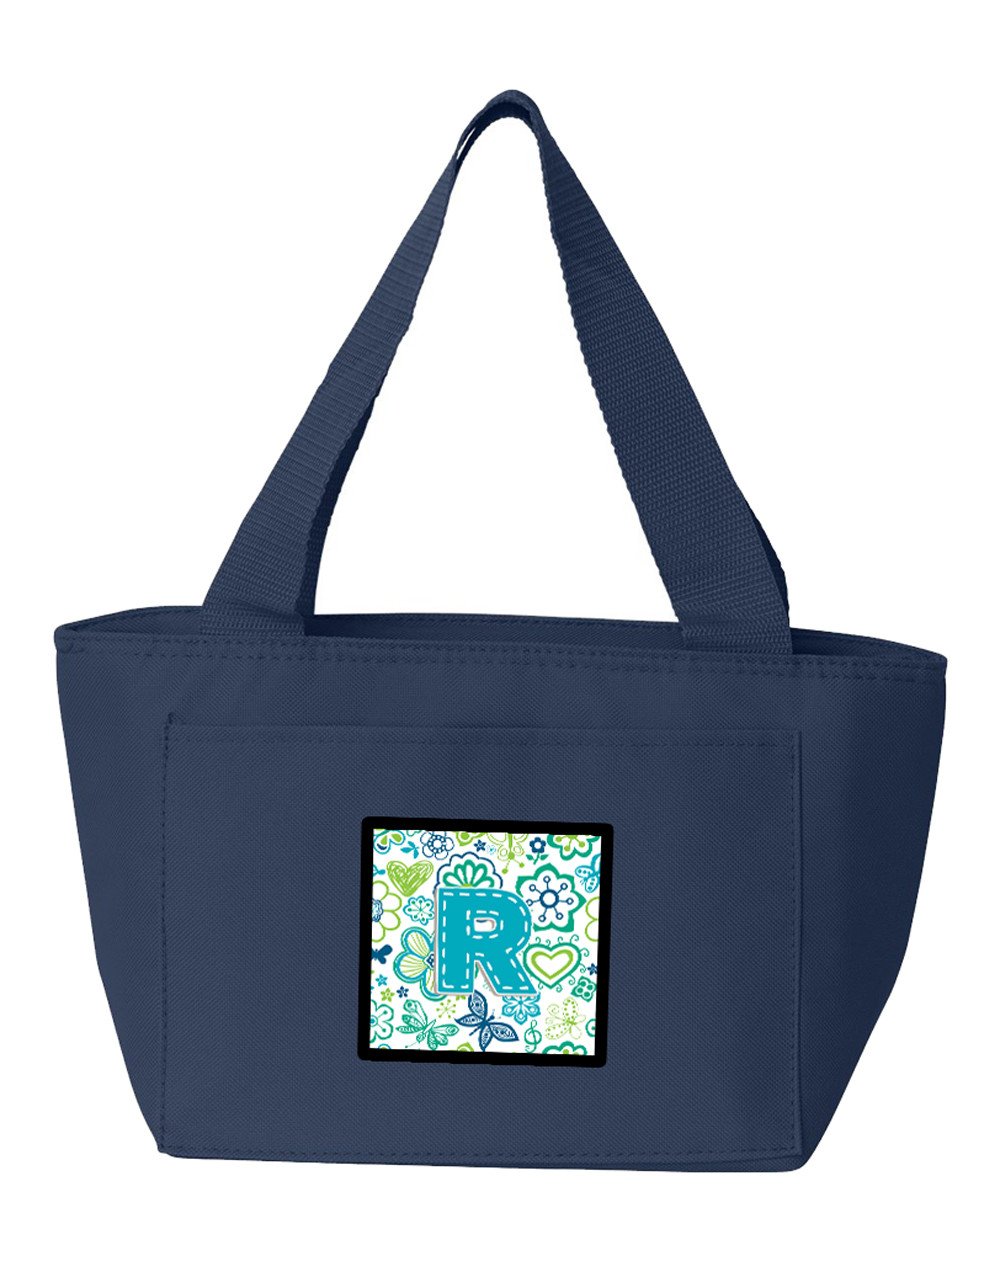 Letter R Flowers and Butterflies Teal Blue Lunch Bag CJ2006-RNA-